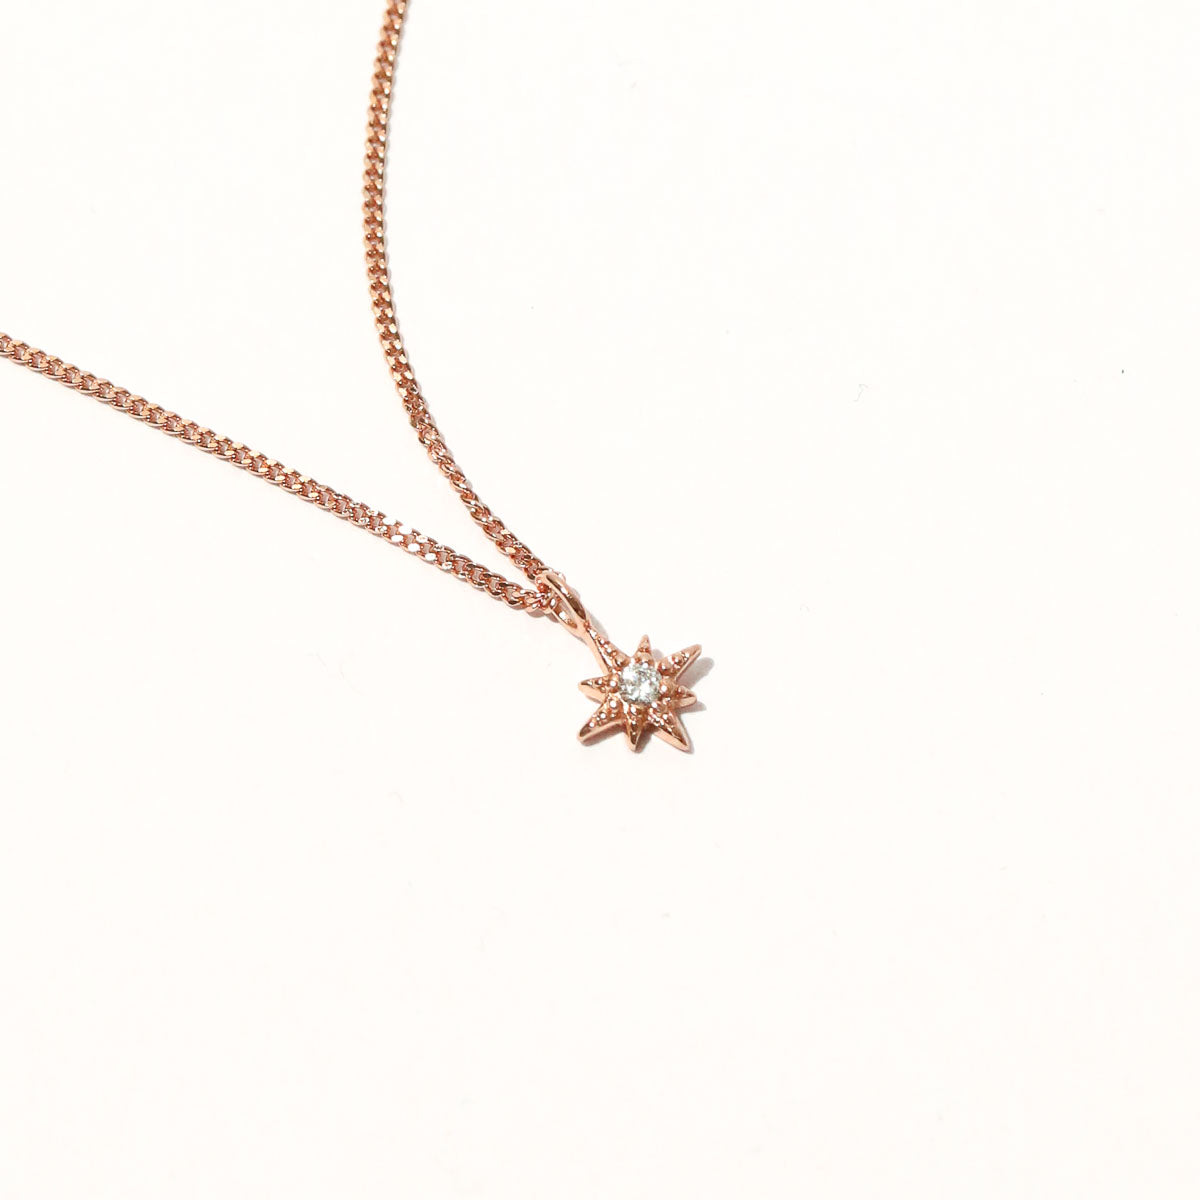 Twilight Star Pendant Necklace in Rose Gold close up shot of the pendant